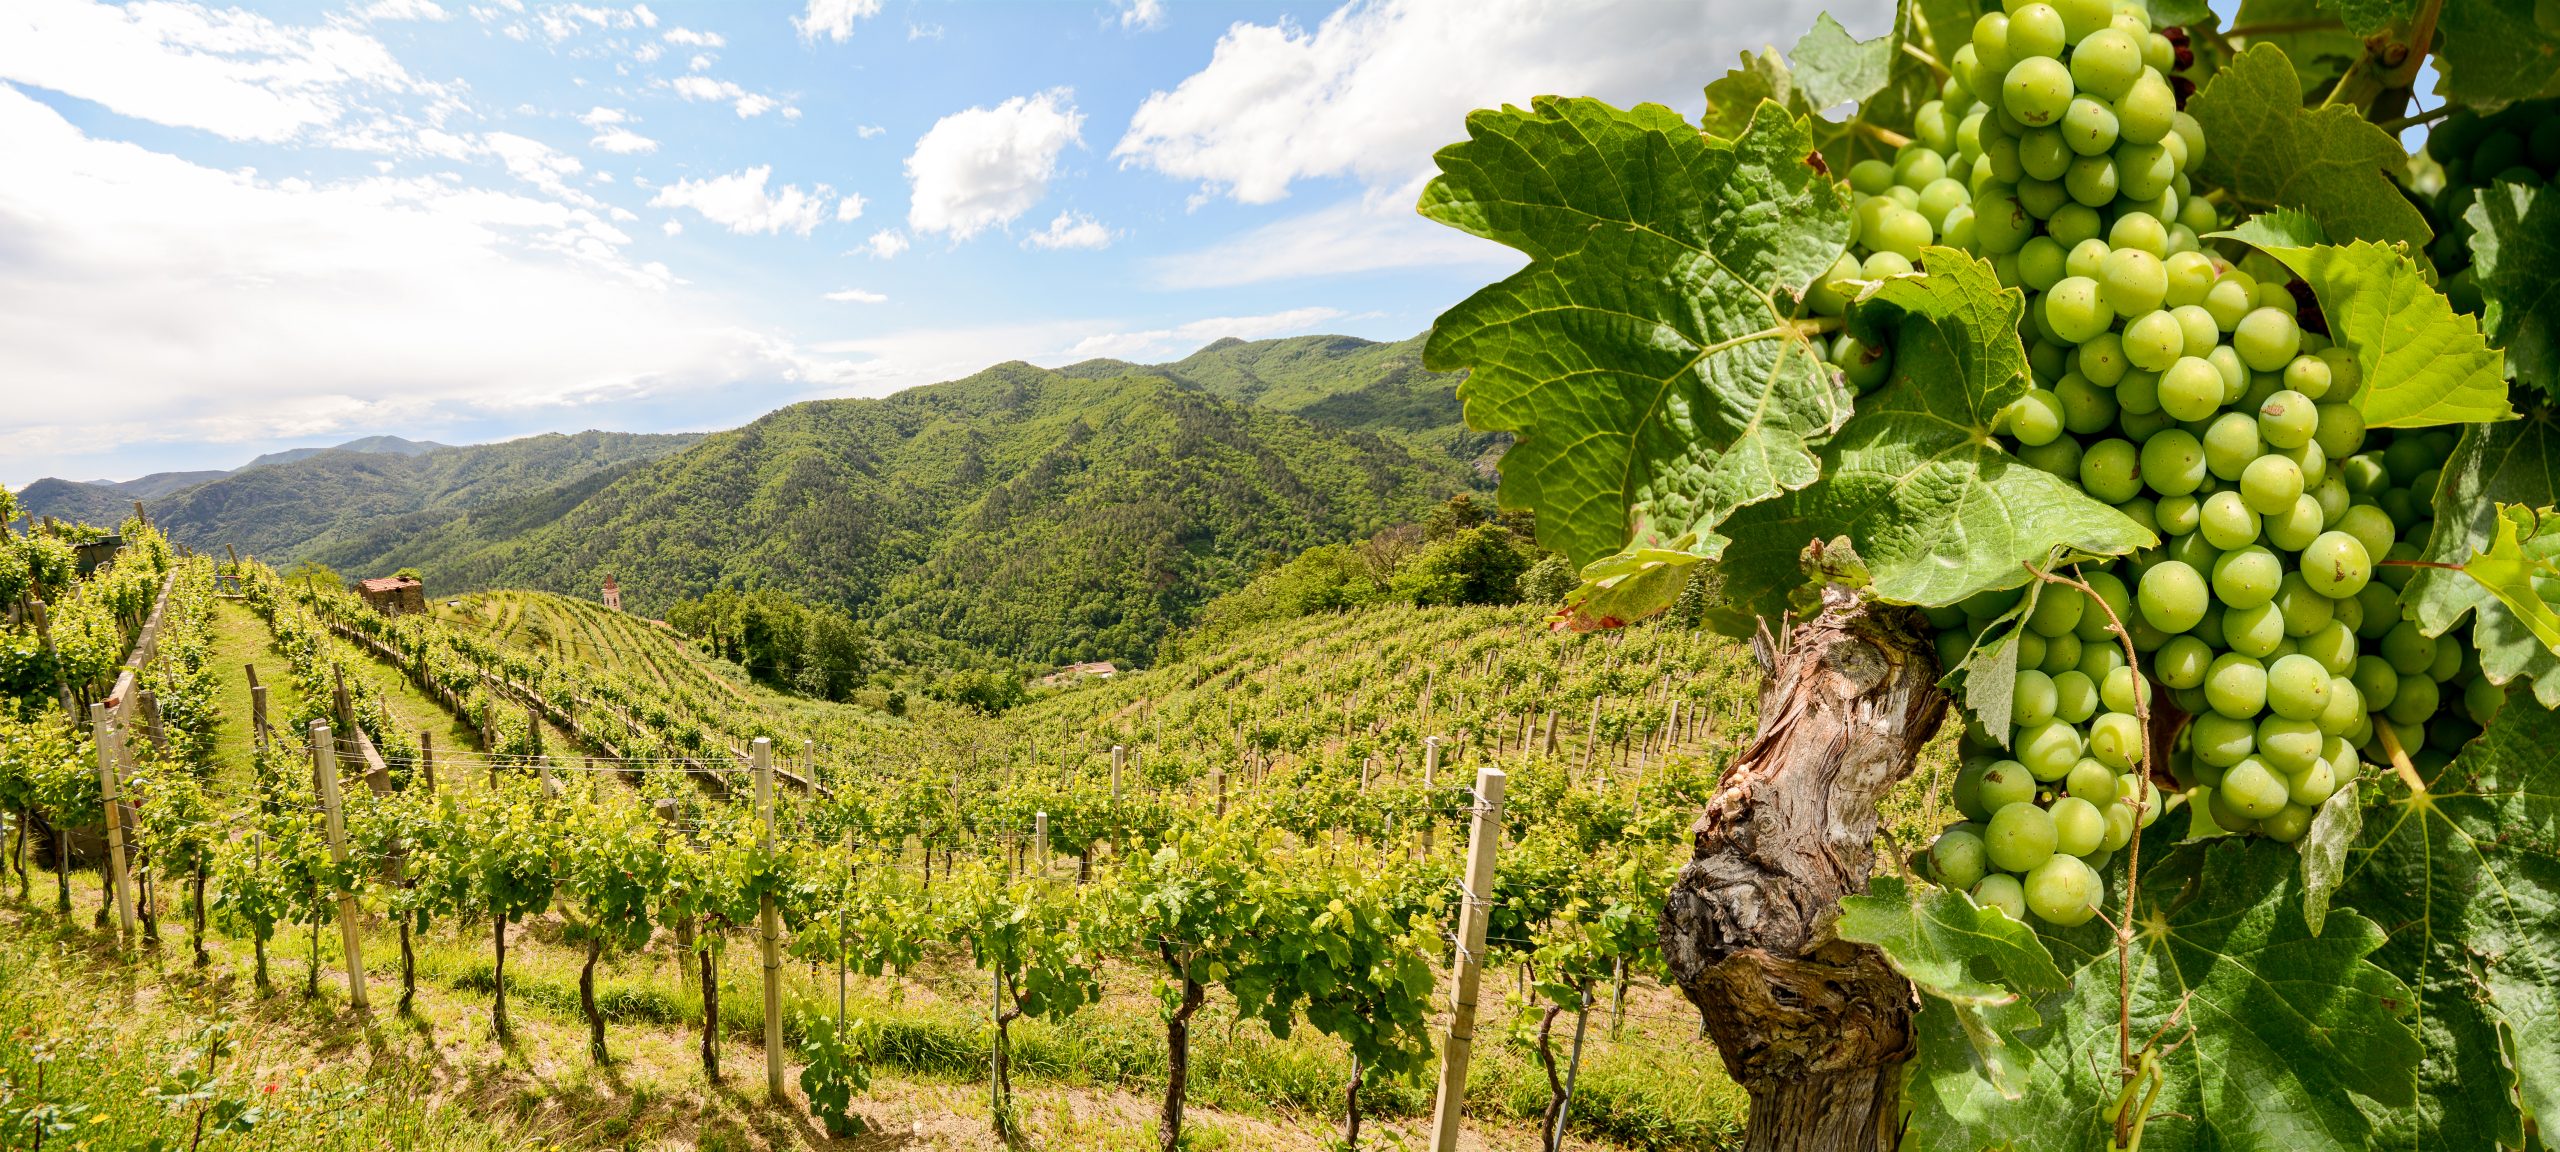 hilly vineyards: sustainable wine roundtable founded to fight climate change